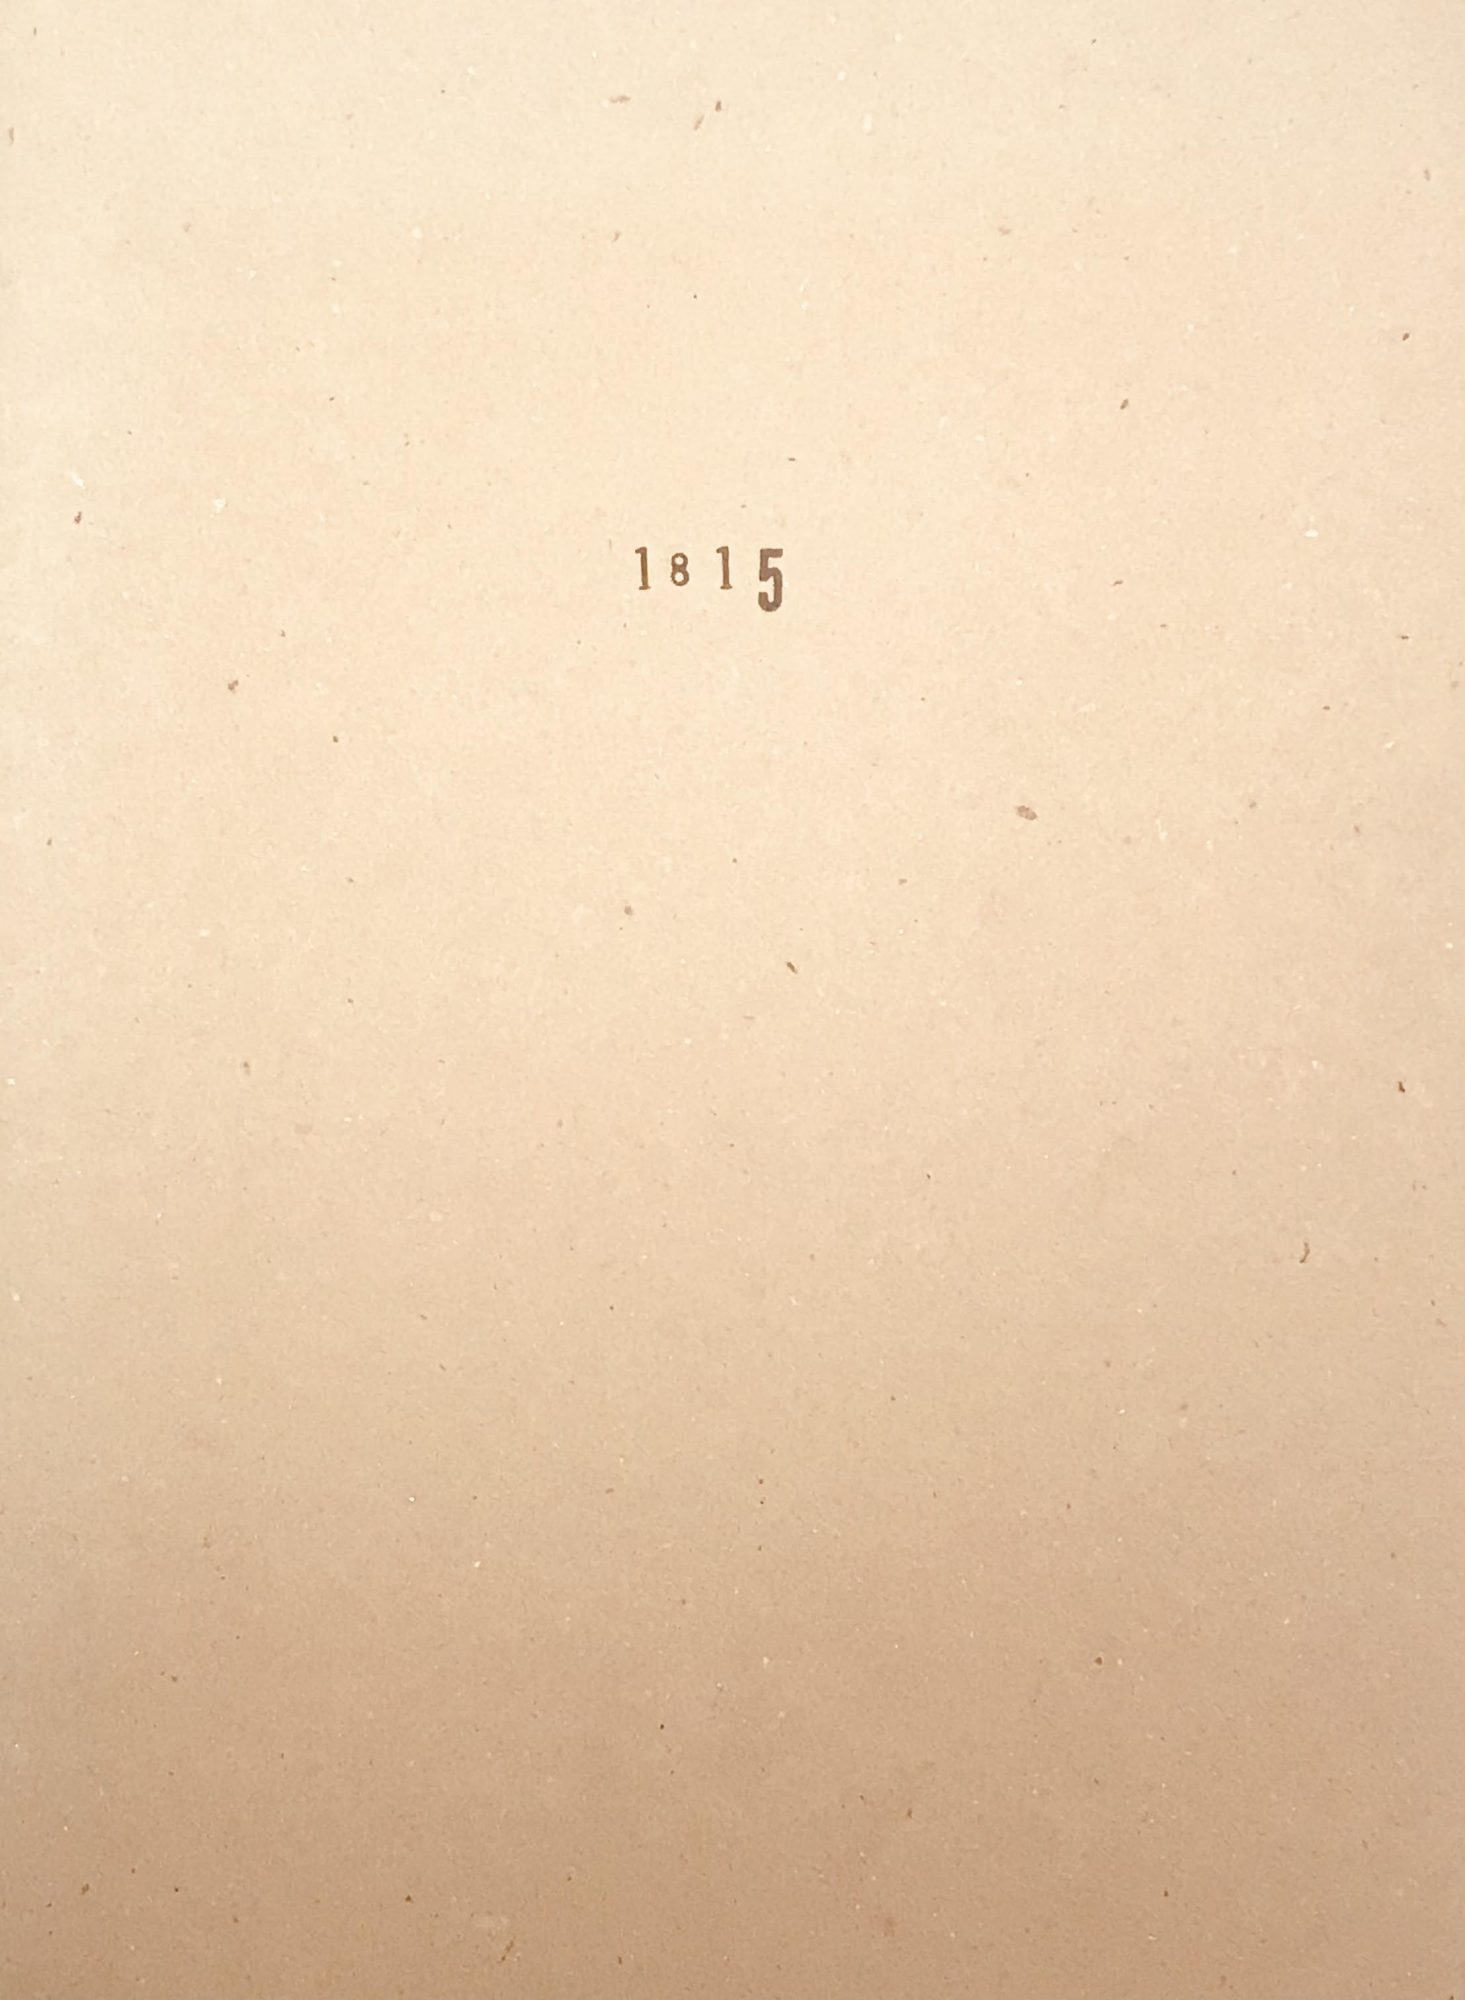 1815, Issue 1